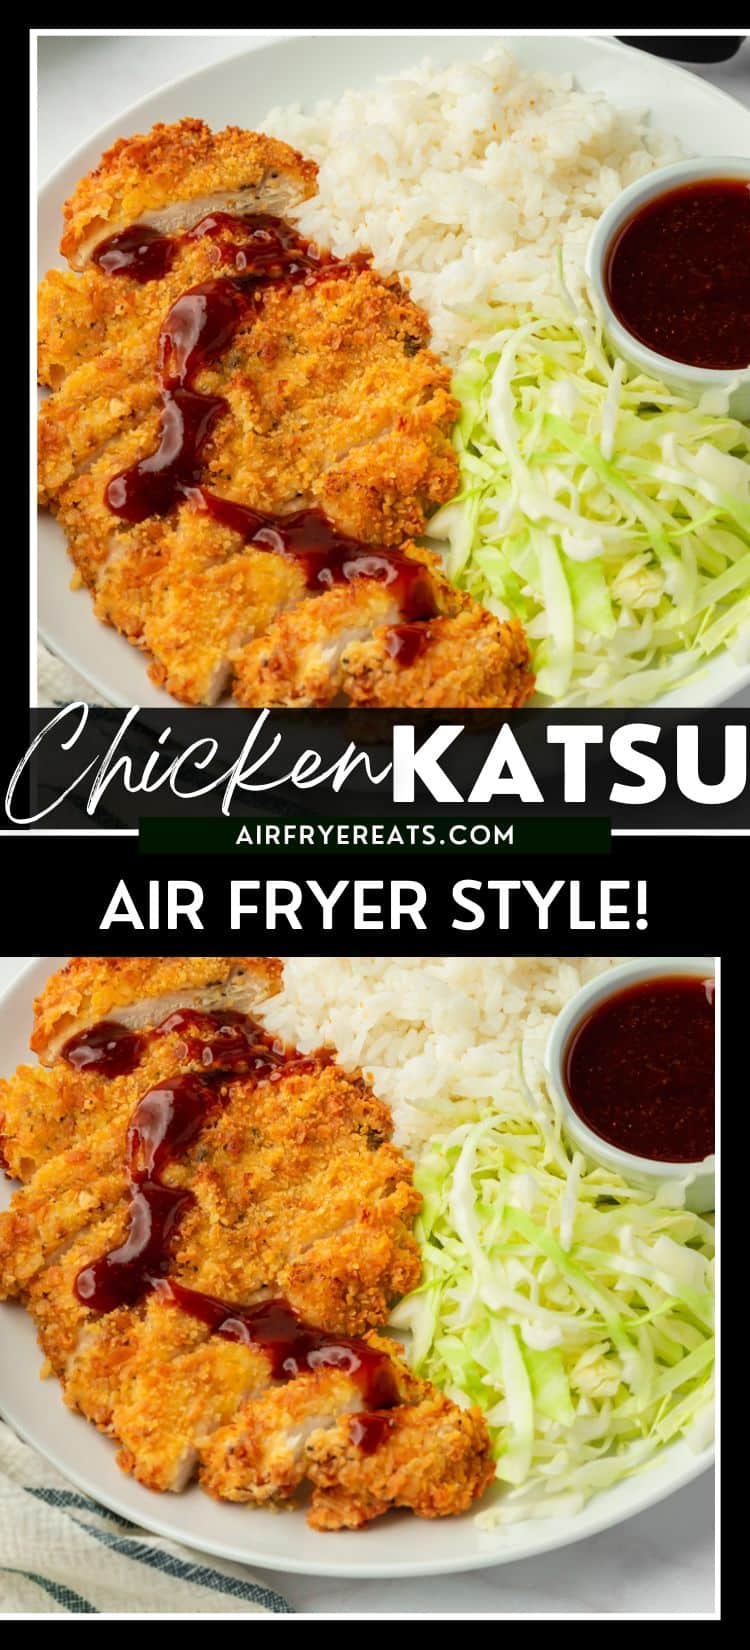 Use your favorite countertop appliance to make Air Fryer Chicken Katsu! It's just like your favorite Japanese restaurant's fried chicken cutlets, complete with a homemade tonkatsu sauce. via @vegetarianmamma